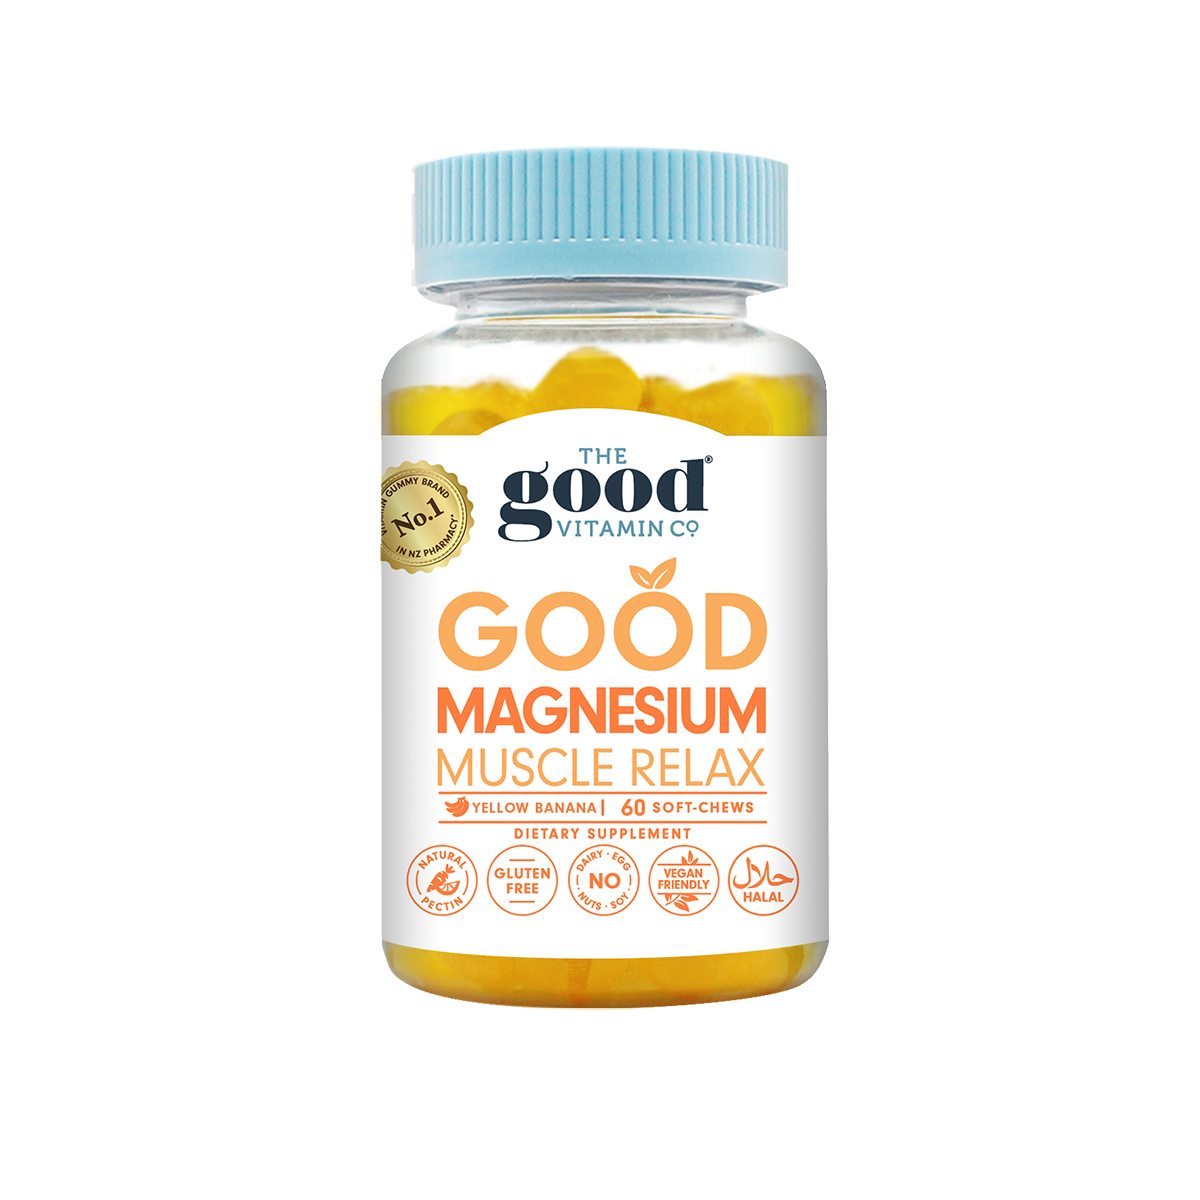 The Good Vitamin Co. Good Magnesium Muscle Relax